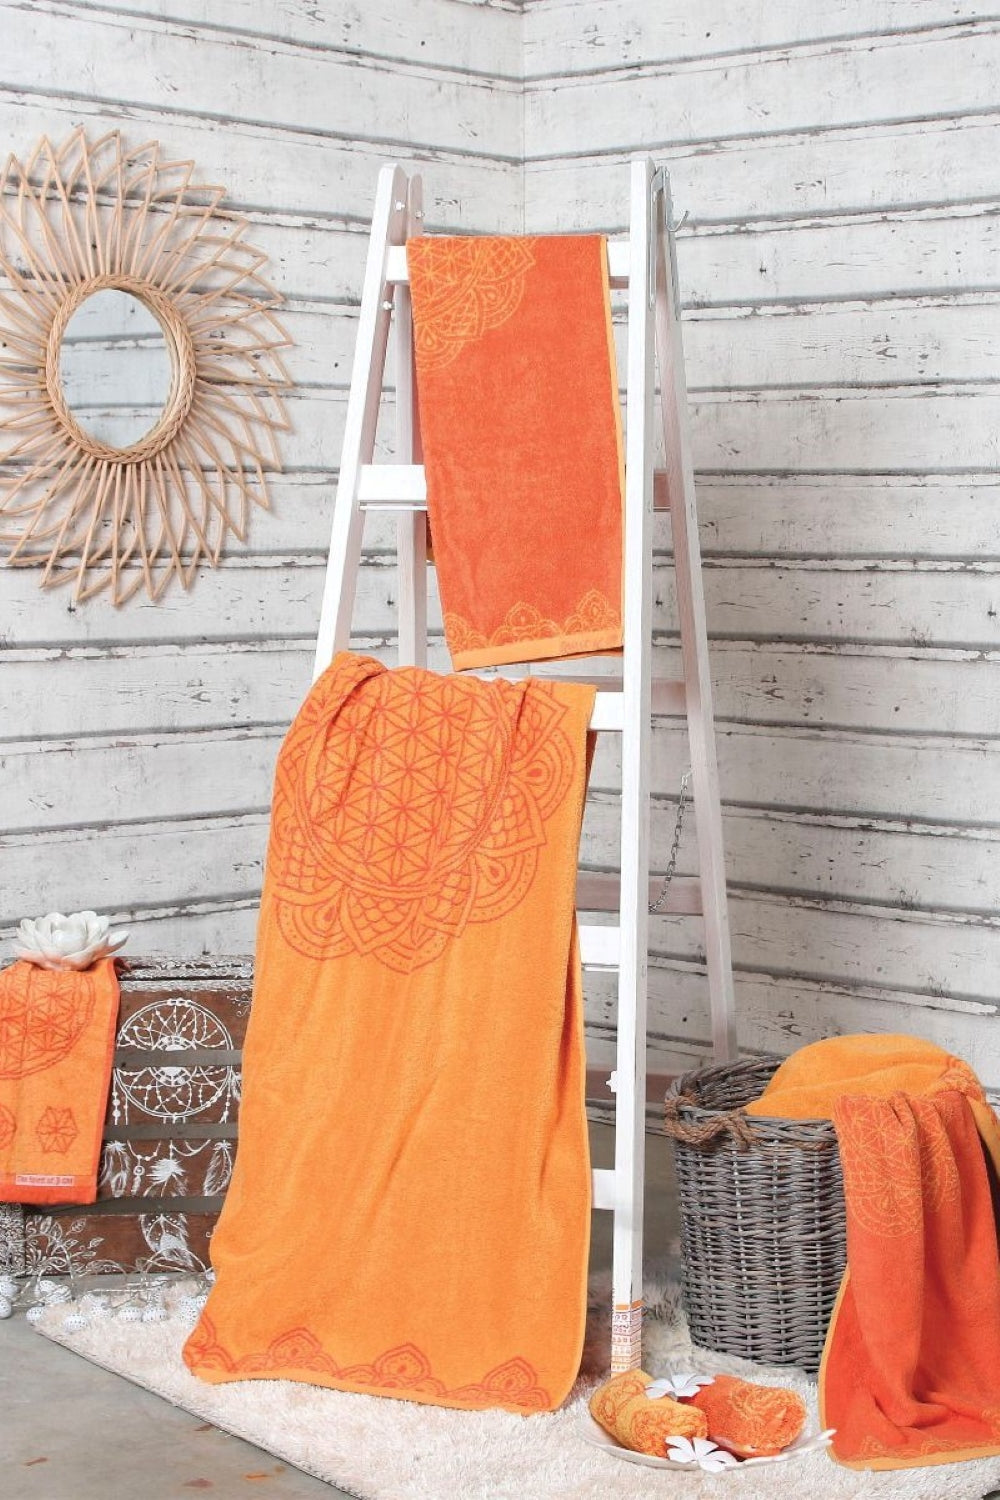 Fengshui terry towel - sun salutation/coral